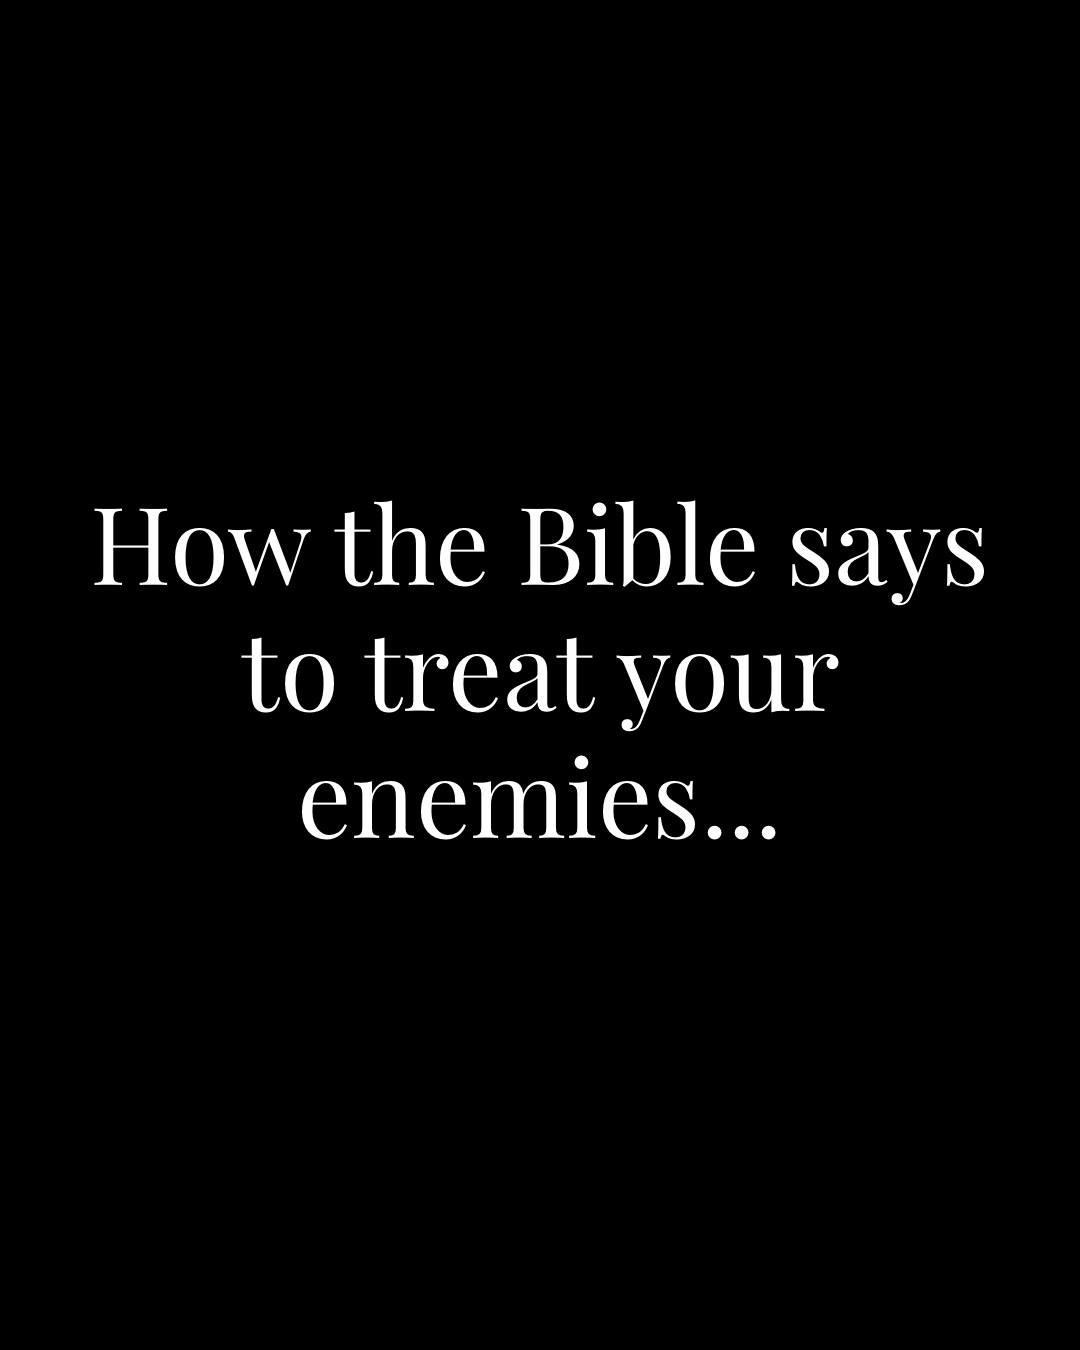 How the Bible says to treat your enemies...